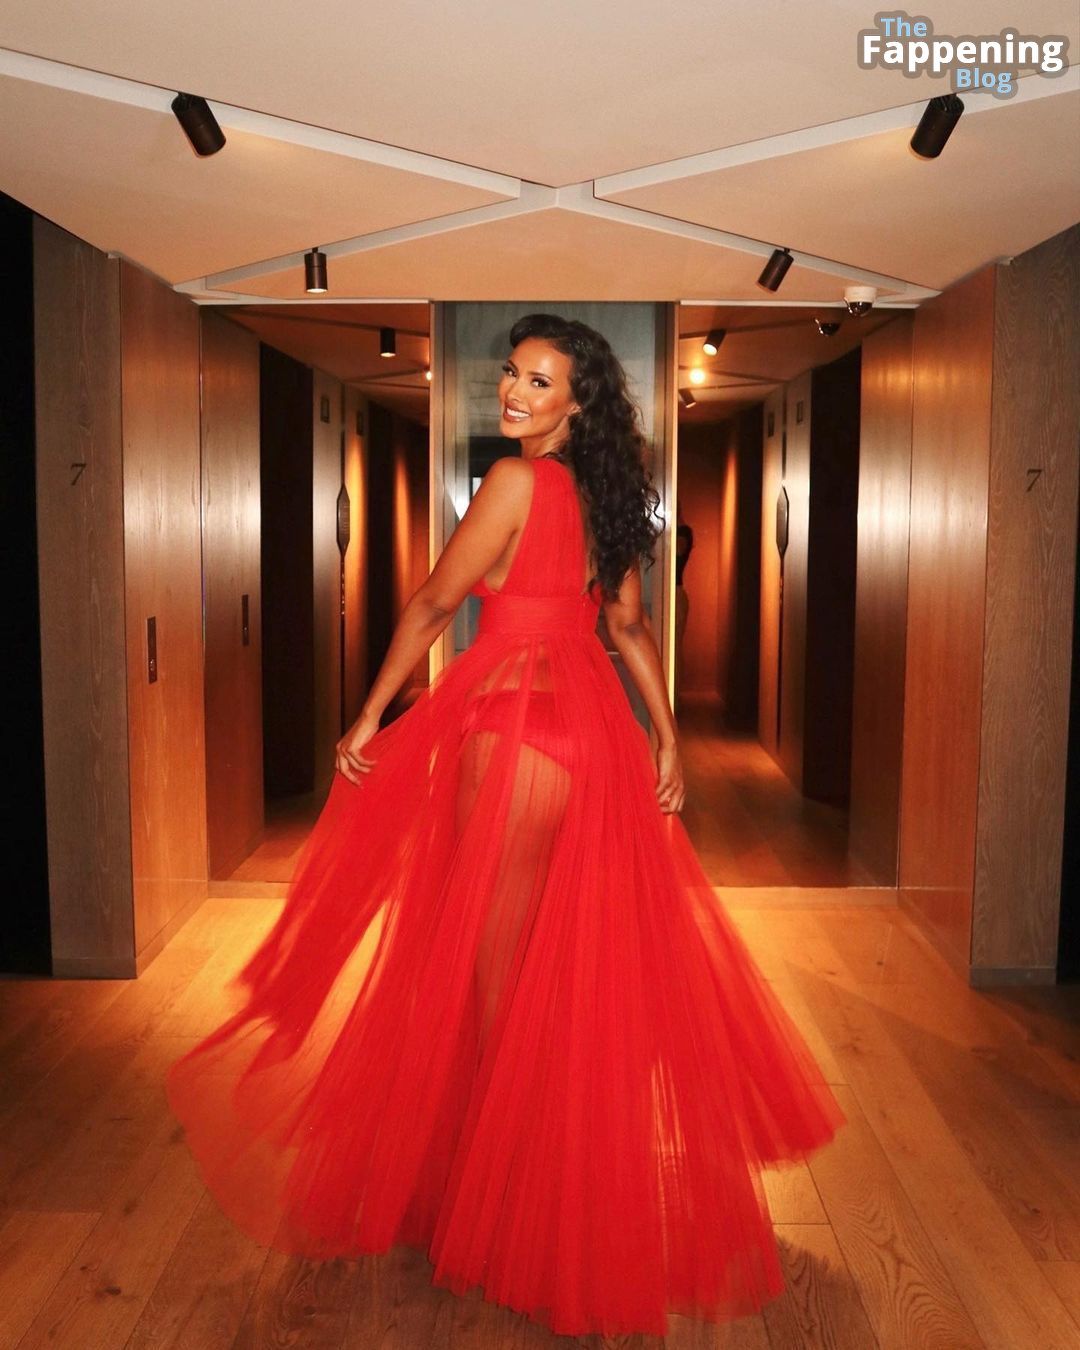 Maya Jama Flaunts Her Curves in a Red Dress (9 Photos)